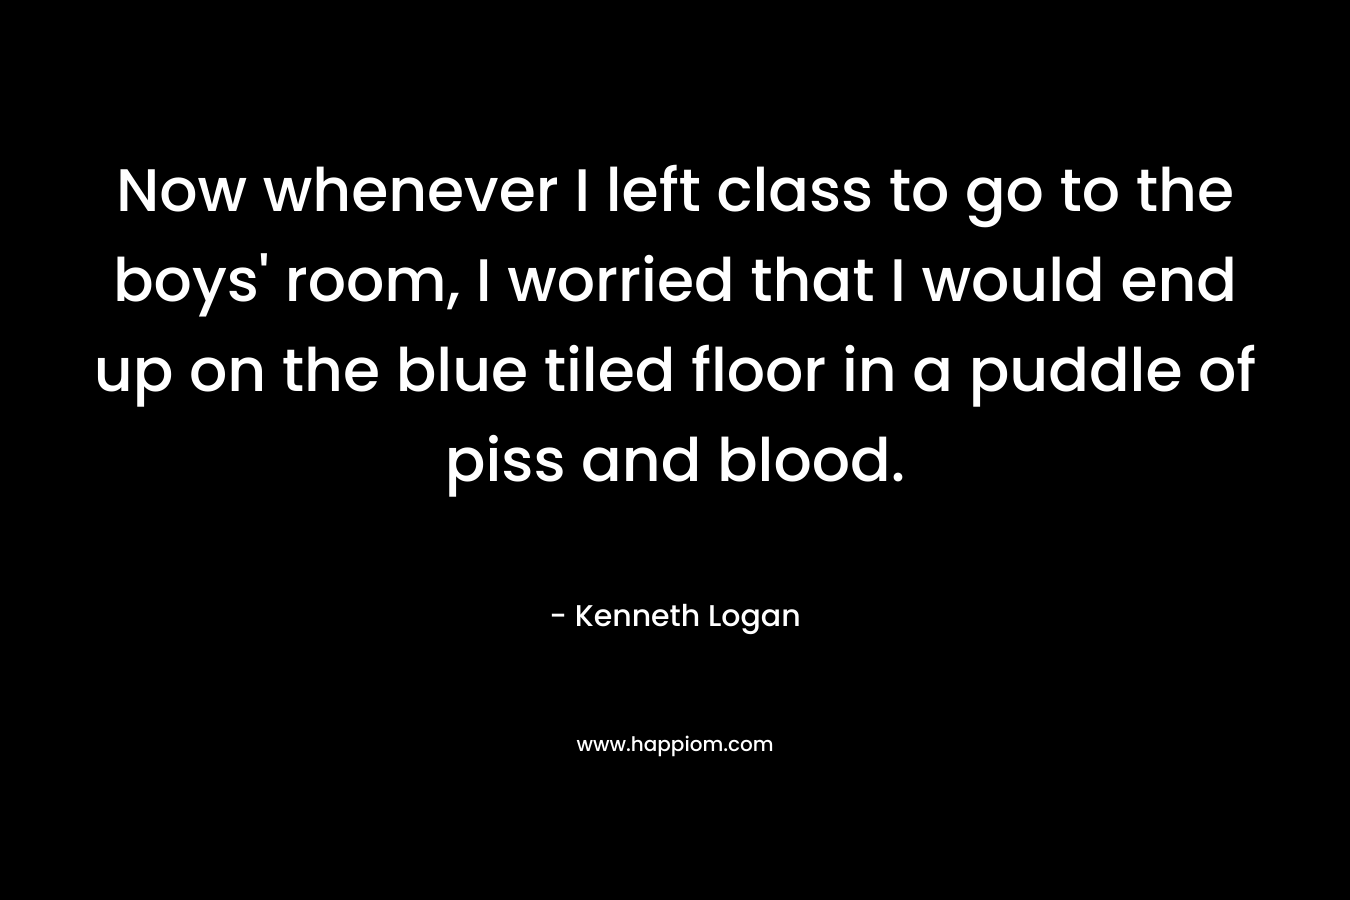 Now whenever I left class to go to the boys' room, I worried that I would end up on the blue tiled floor in a puddle of piss and blood.